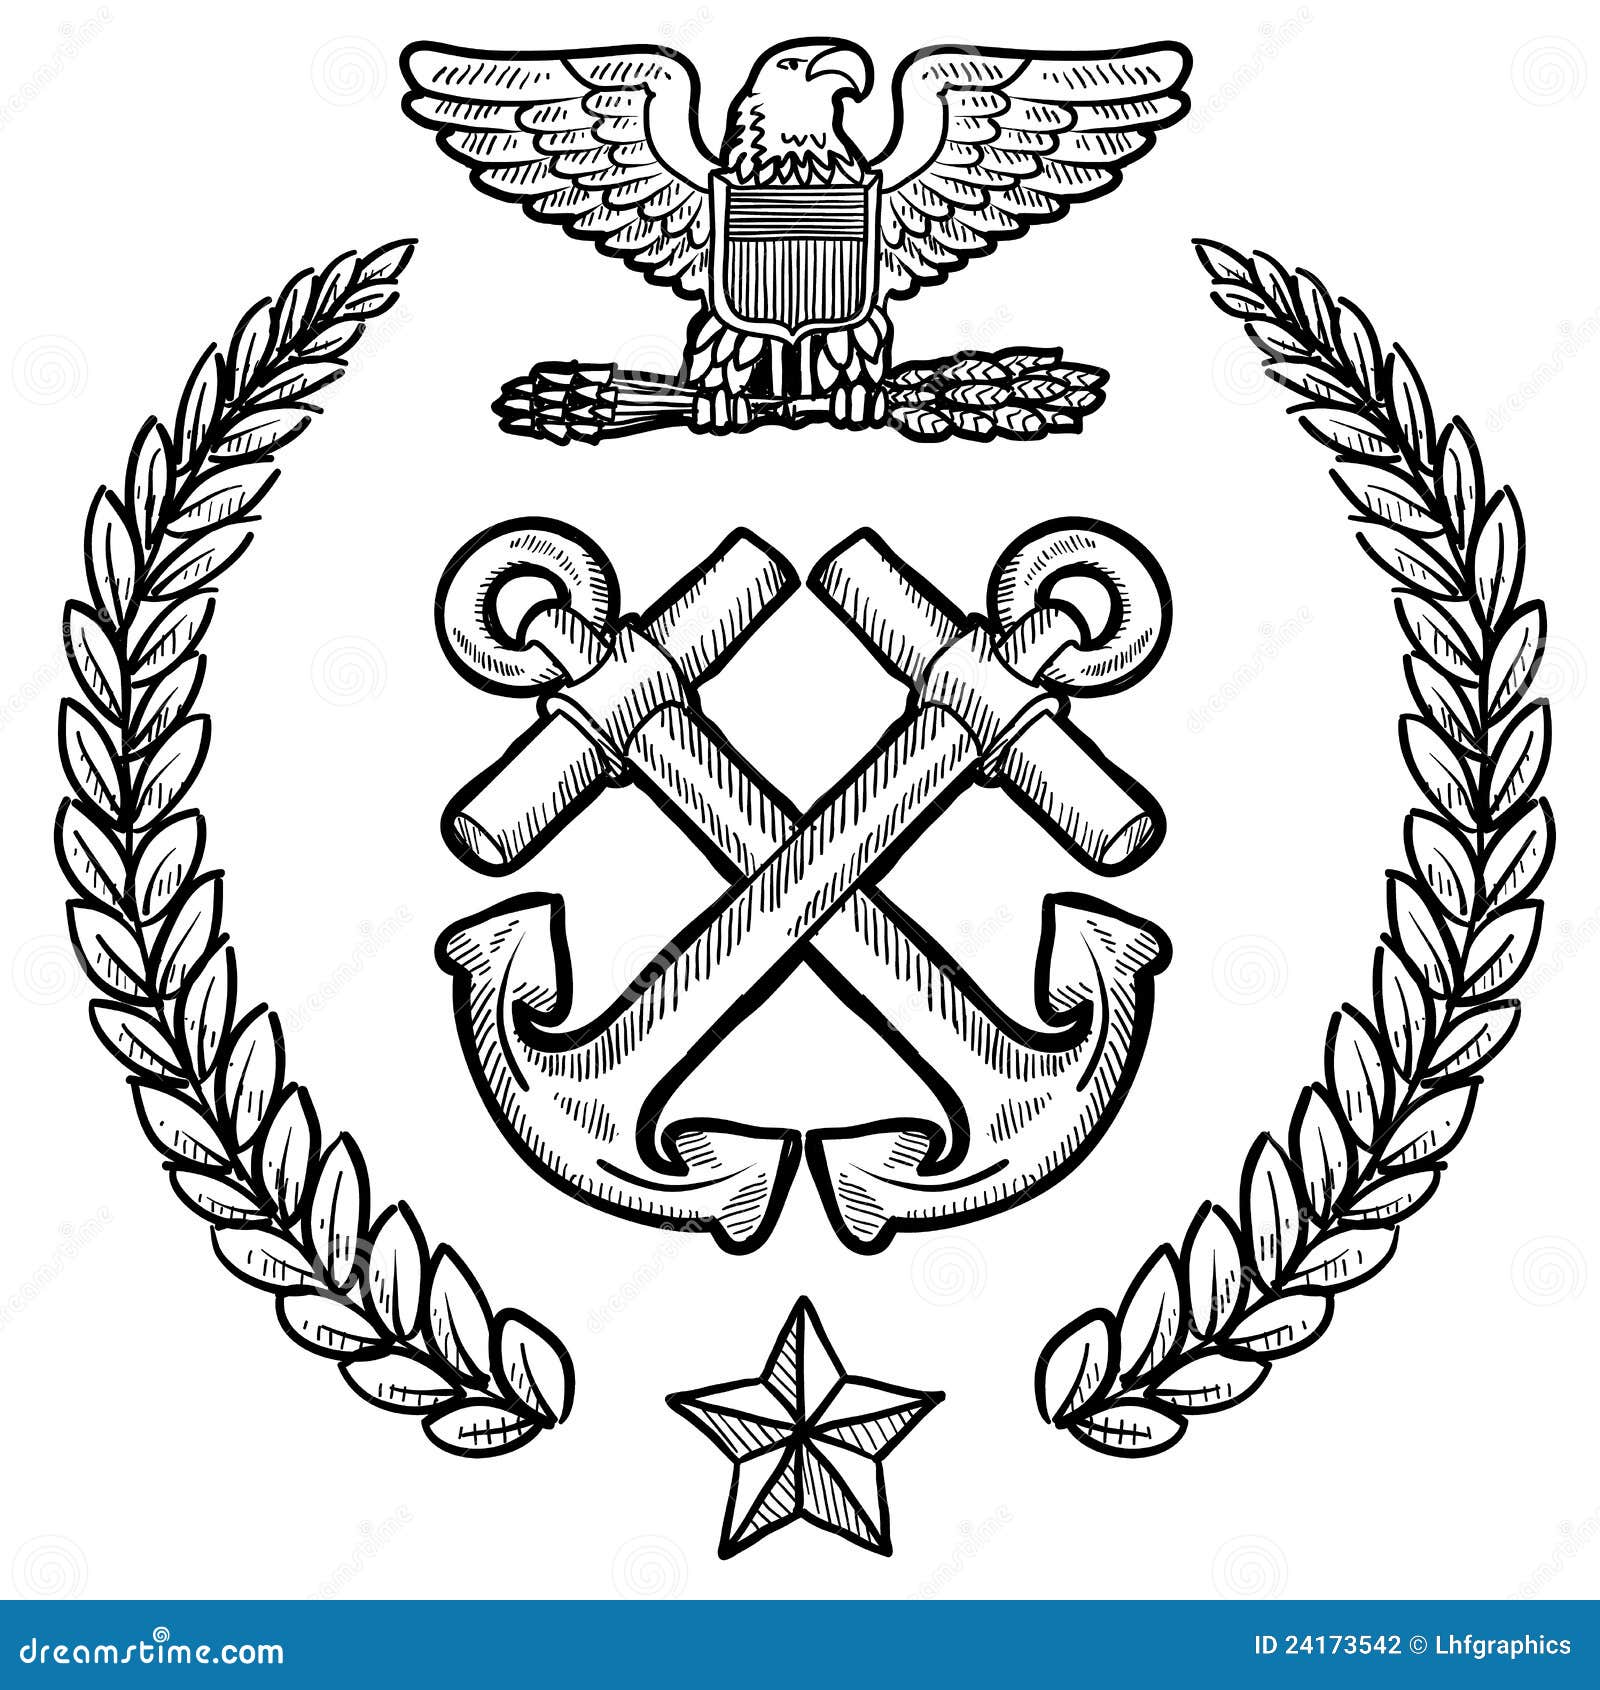 us navy insignia with wreath